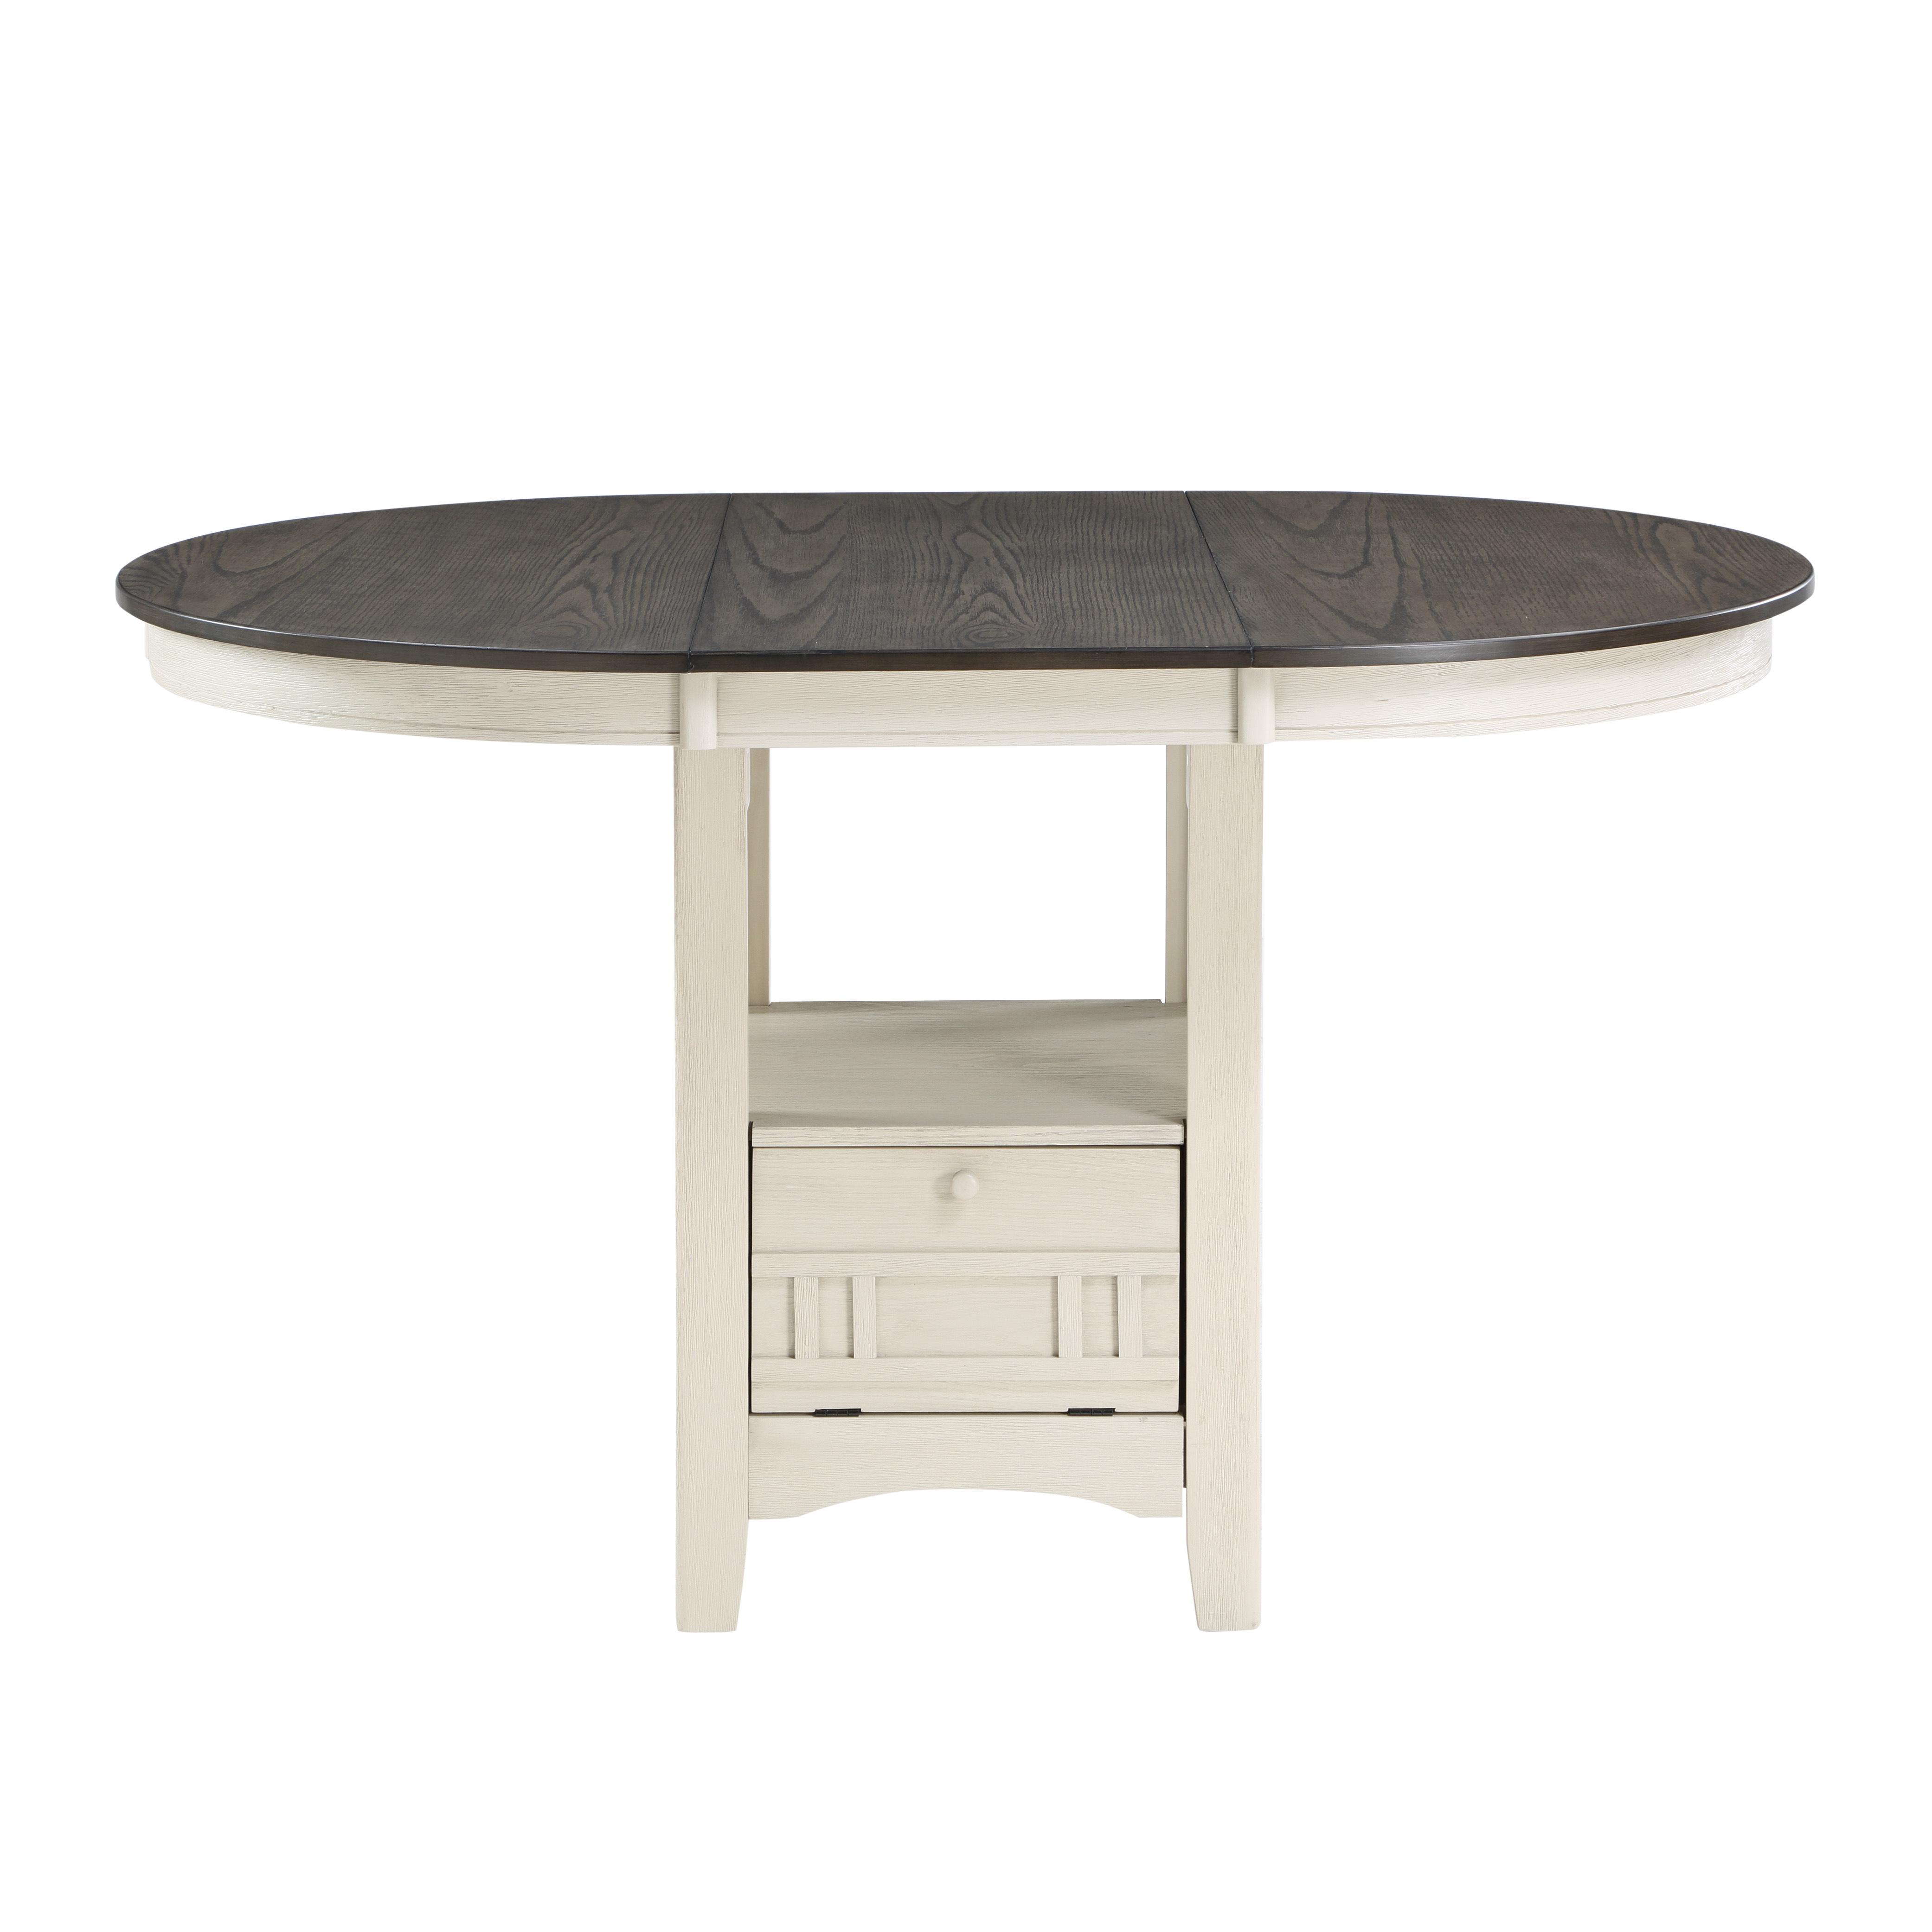 Traditional Counter Height Table 2423W-36 Junipero 2423W-36 in Antique White 